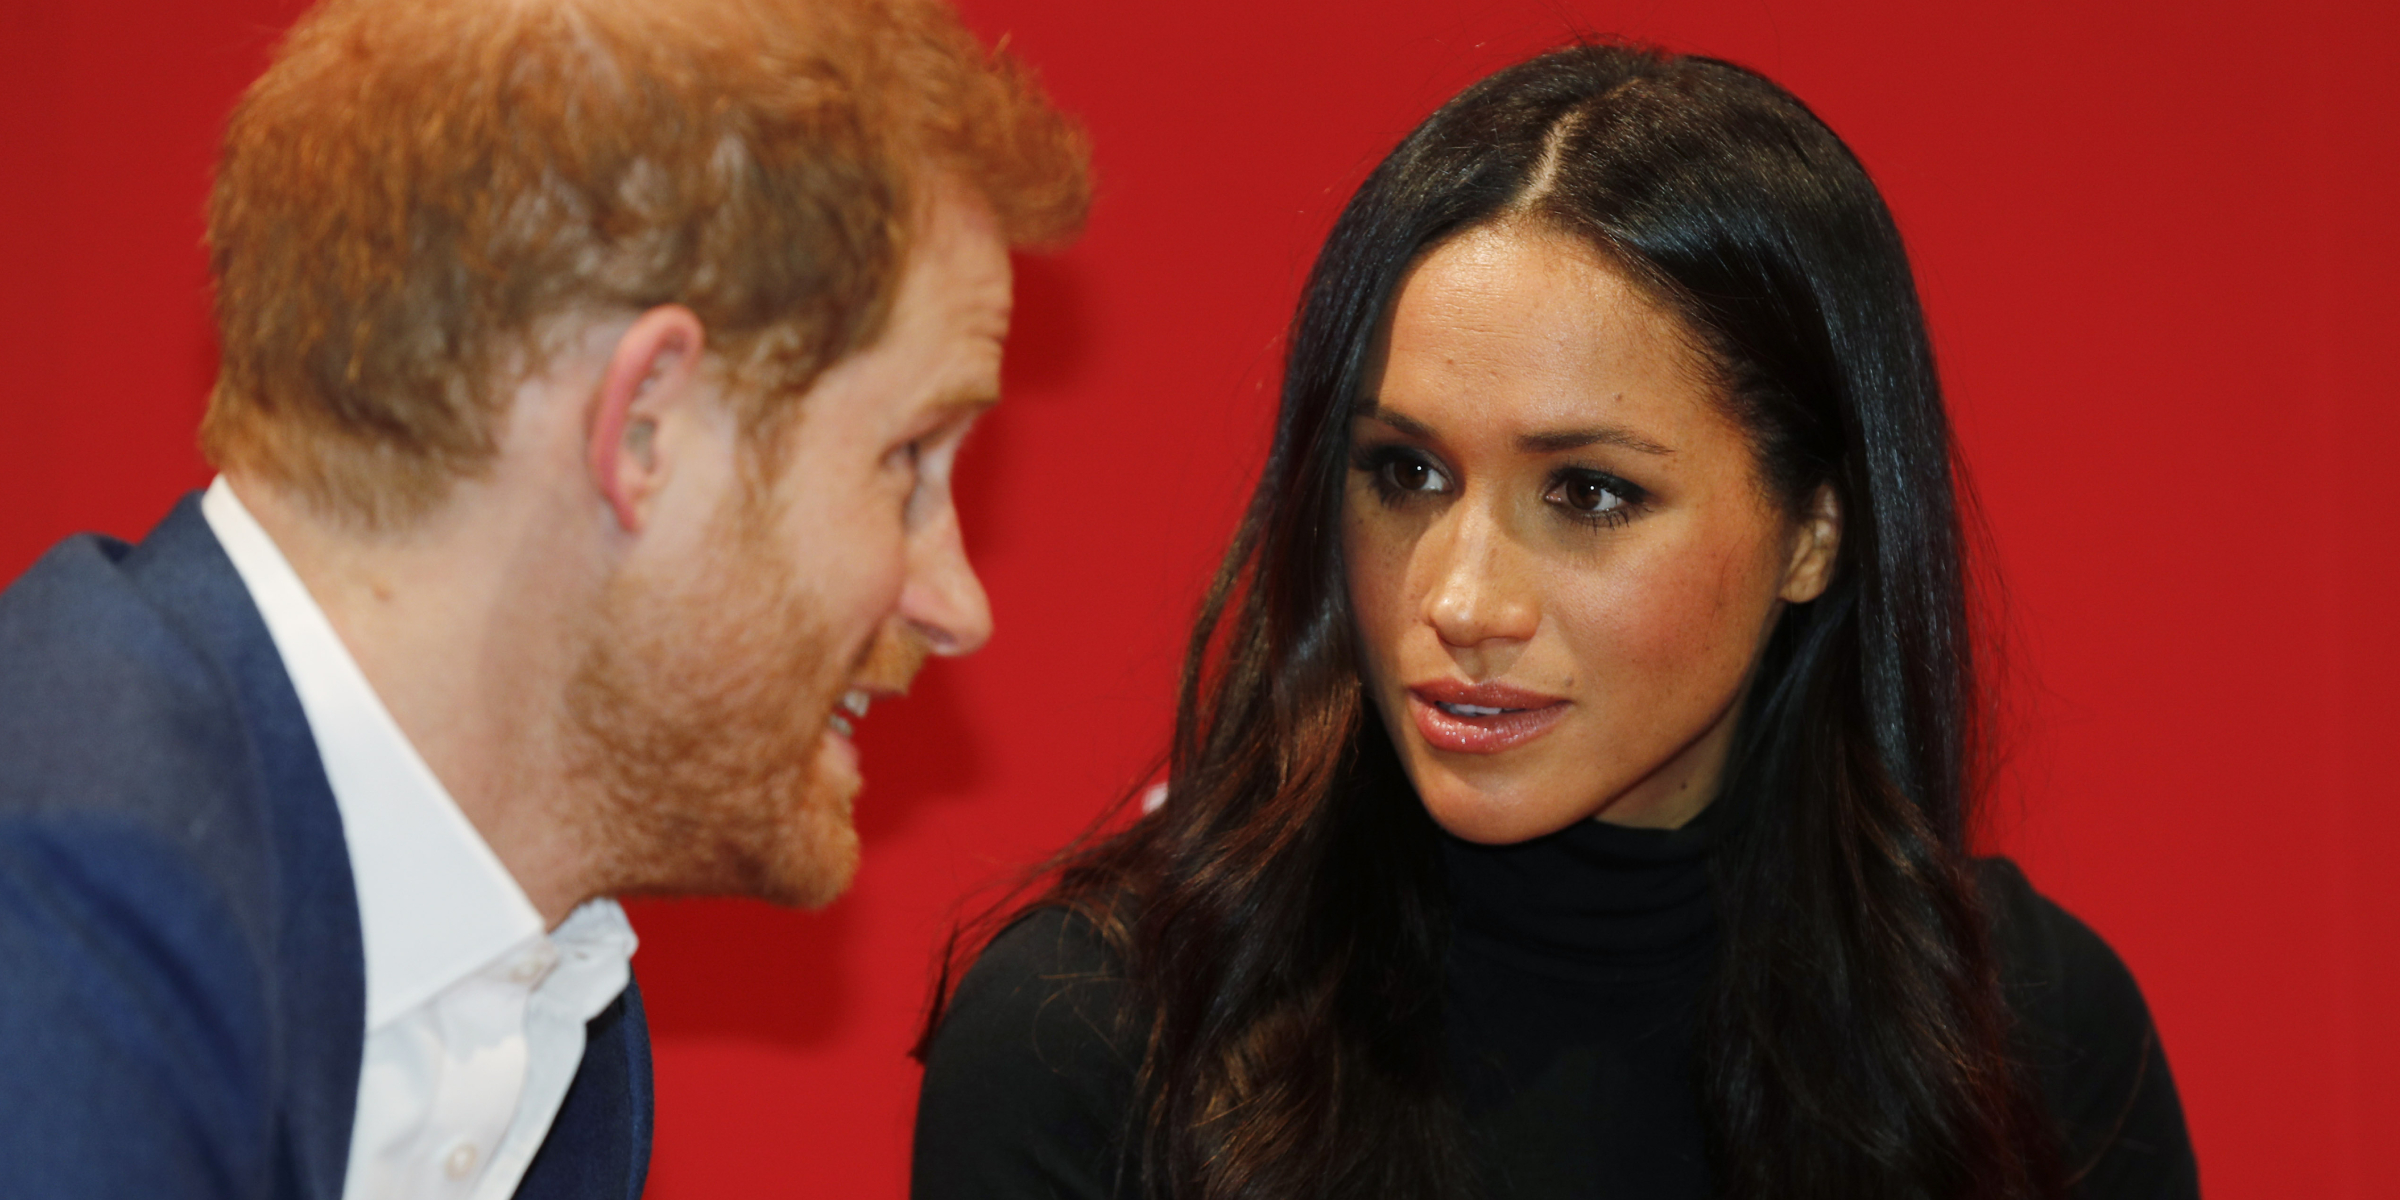 Meghan Markle and Prince Harry | Source: Getty Images